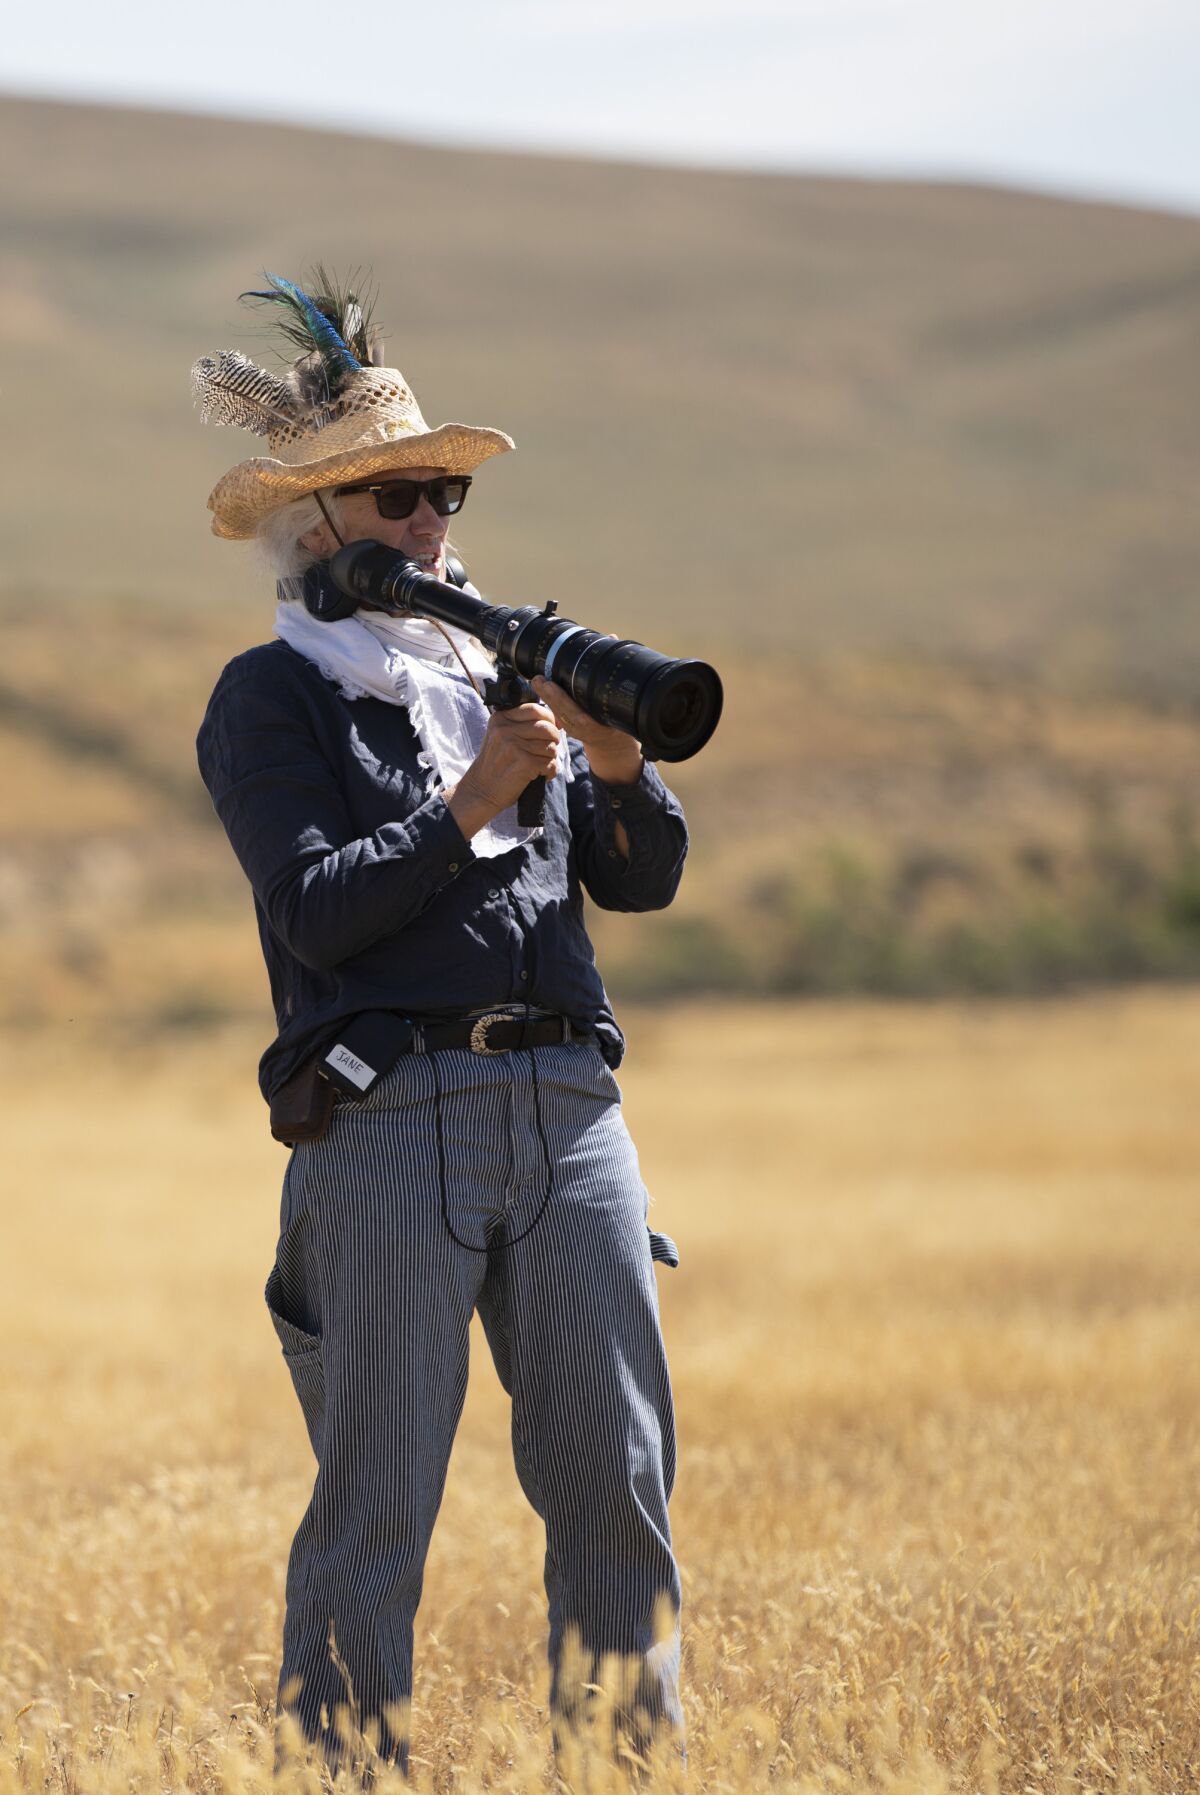 A woman holding a long camera lens stands in a field.